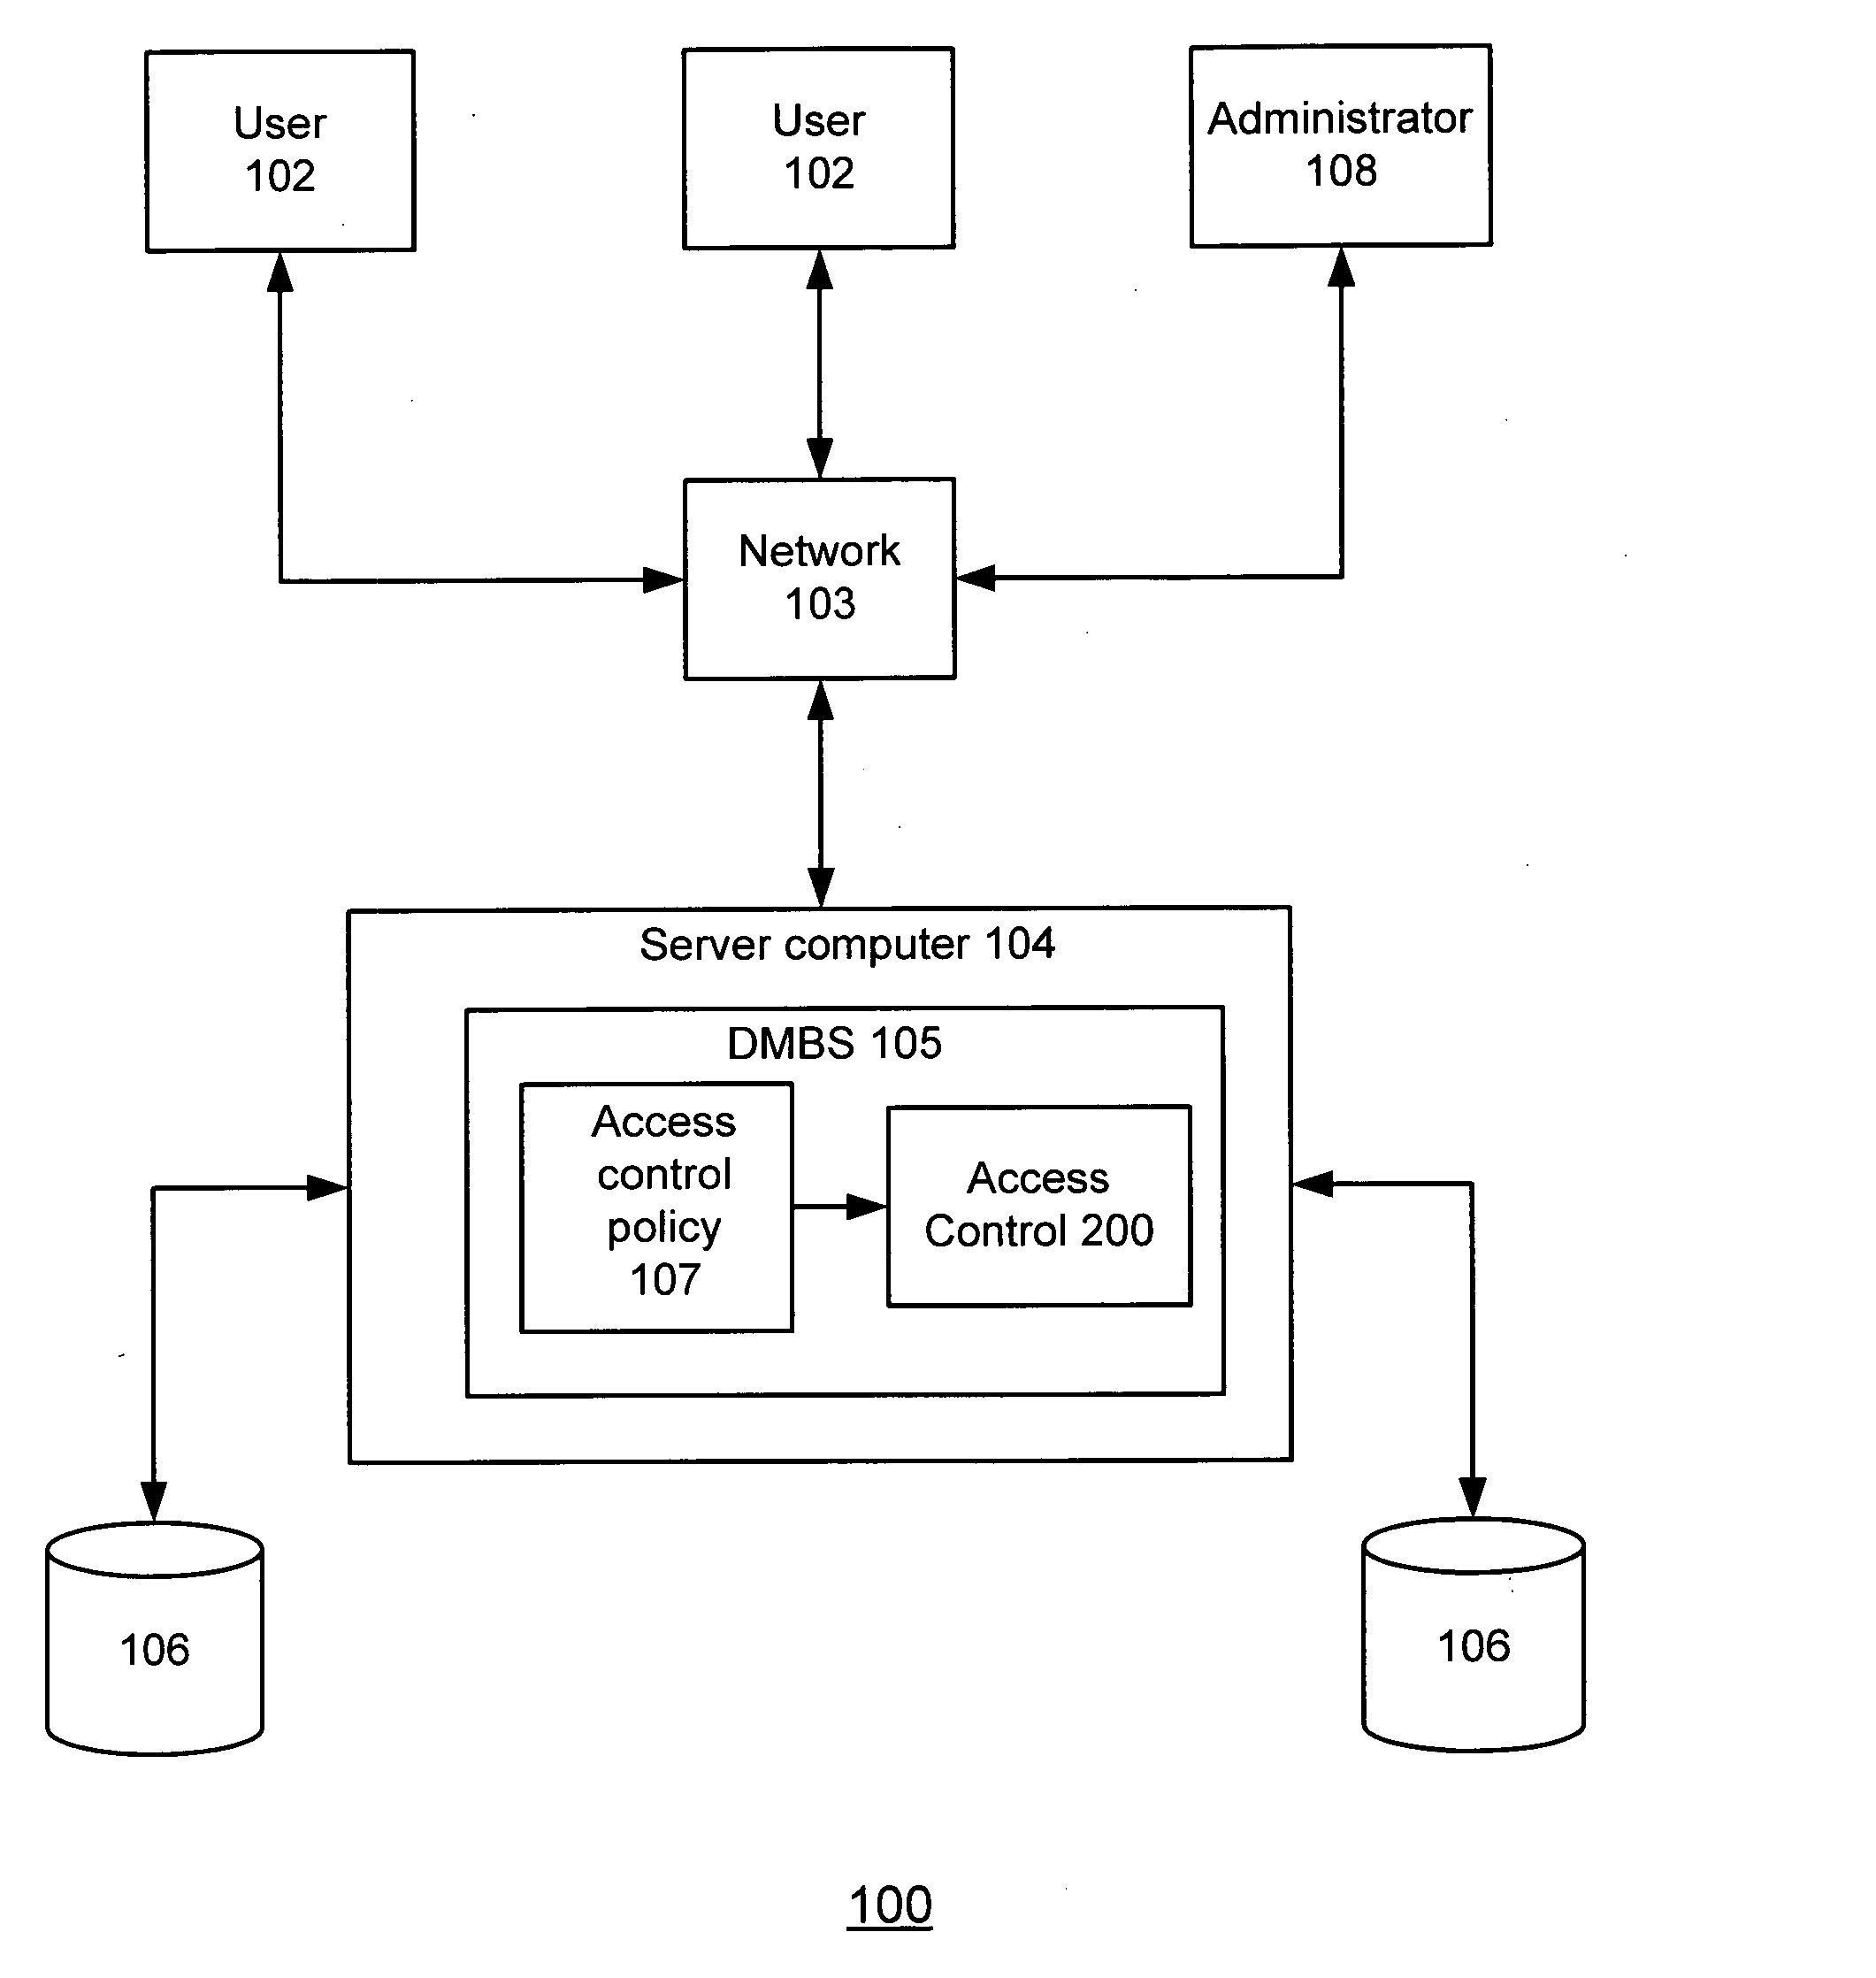 Method and system for providing path-level access control for structured documents stored in a database